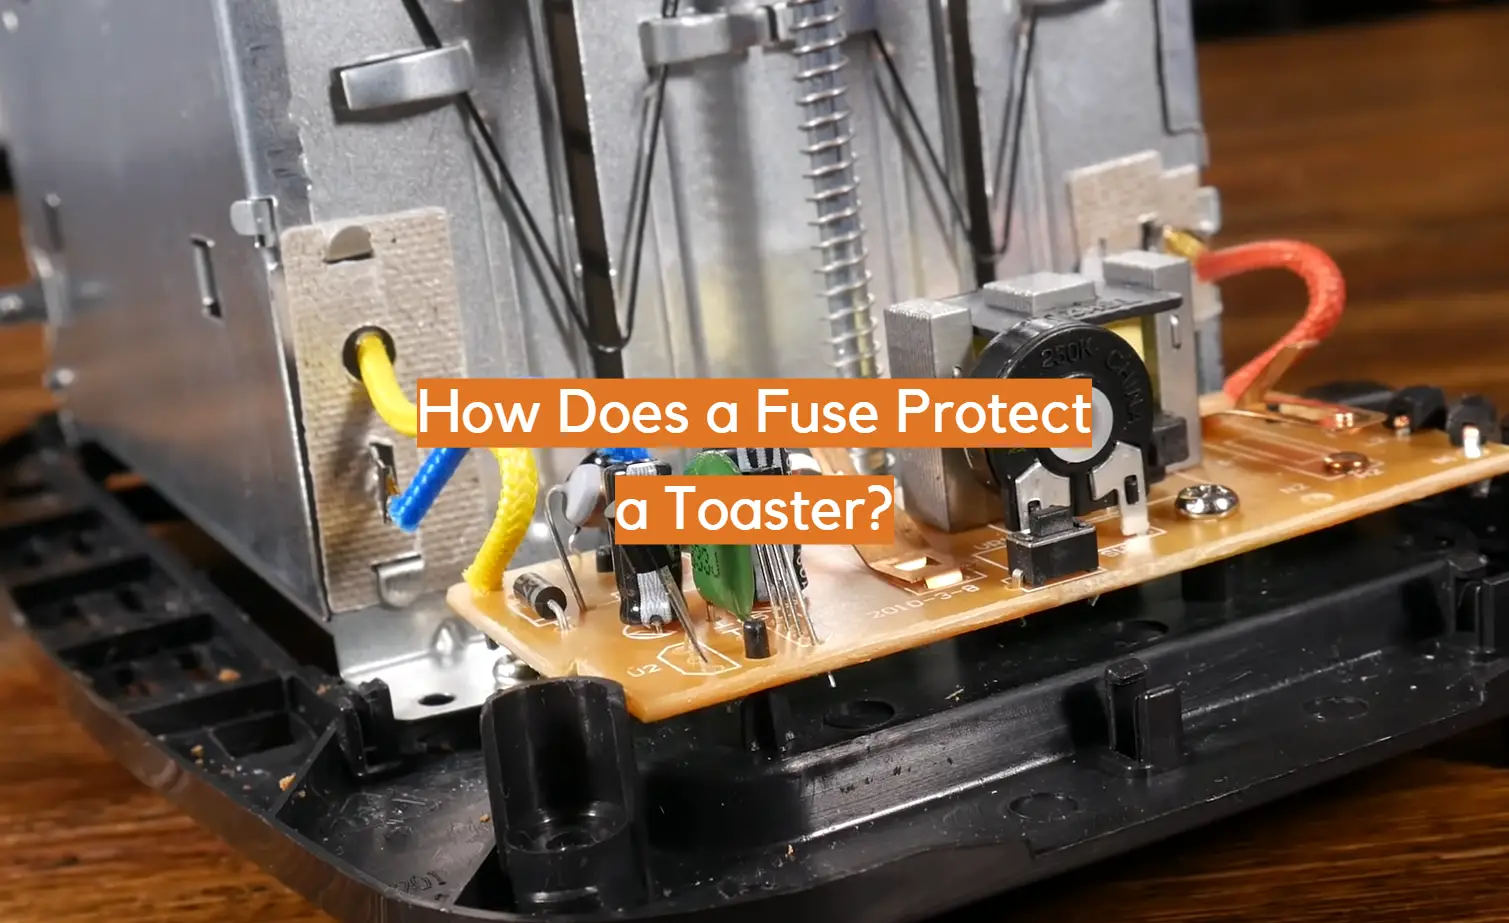 How Does a Fuse Protect a Toaster?